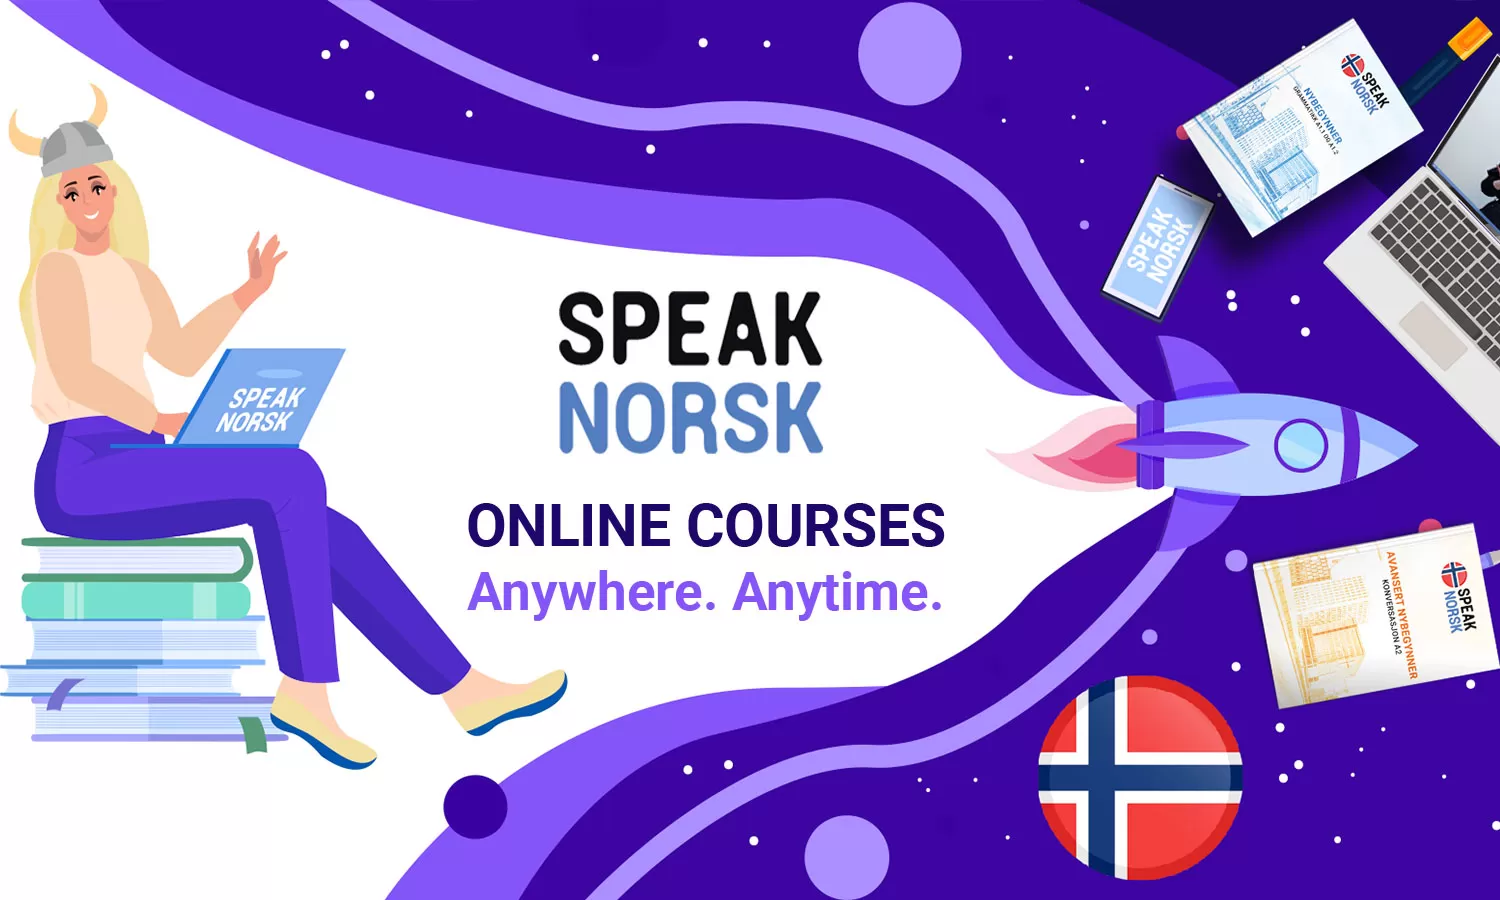 Learn Norwegian with Speak Norsk online courses 2023